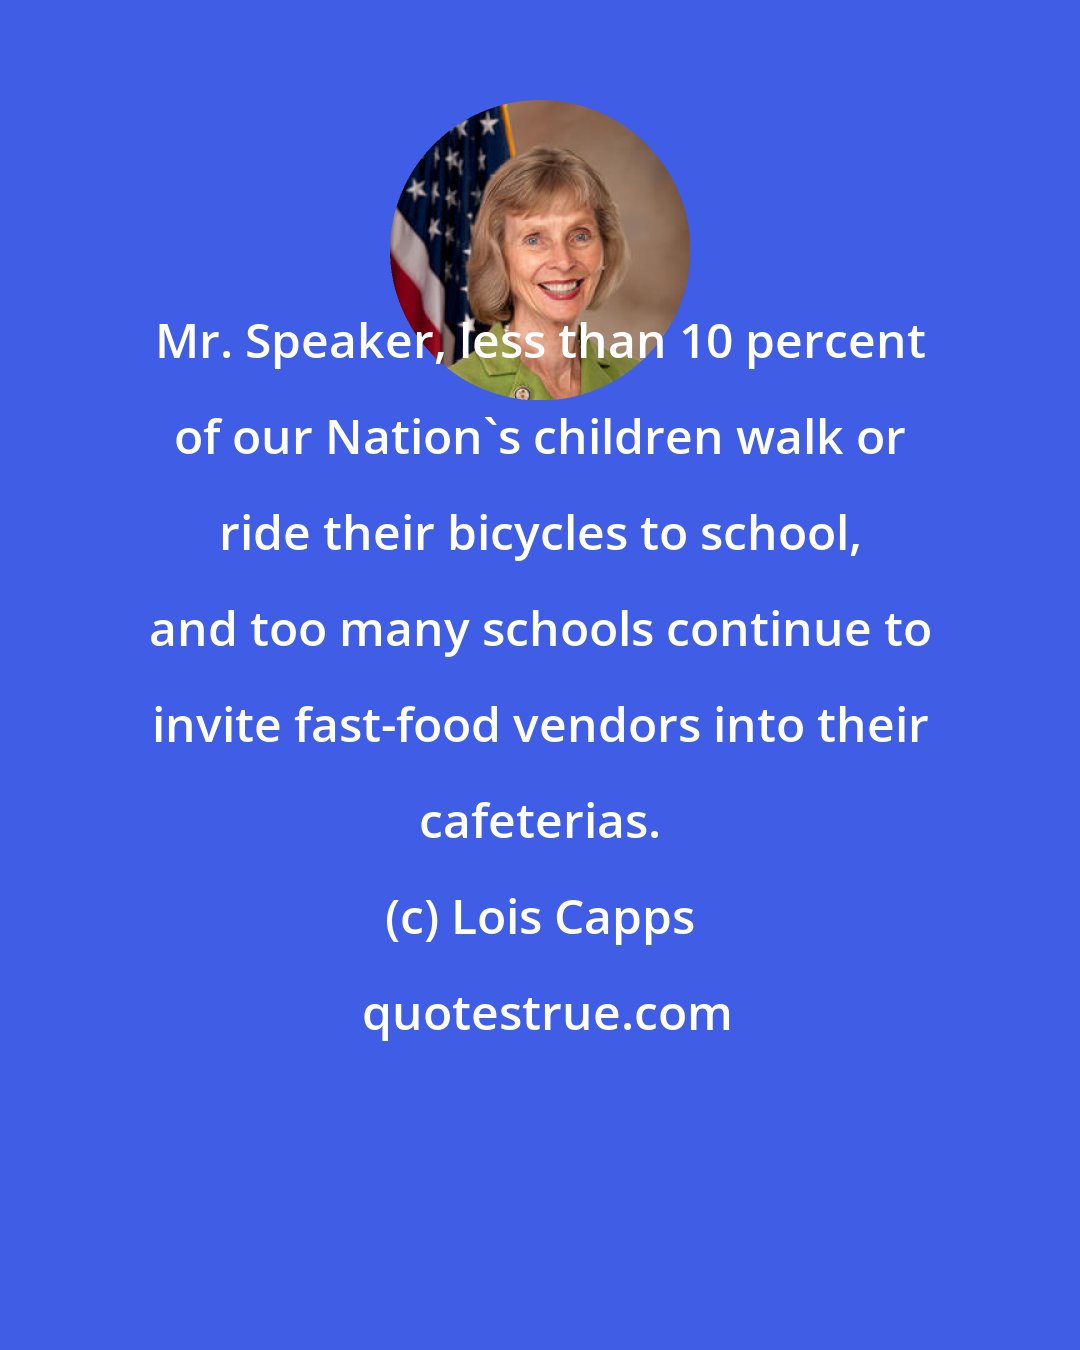 Lois Capps: Mr. Speaker, less than 10 percent of our Nation's children walk or ride their bicycles to school, and too many schools continue to invite fast-food vendors into their cafeterias.